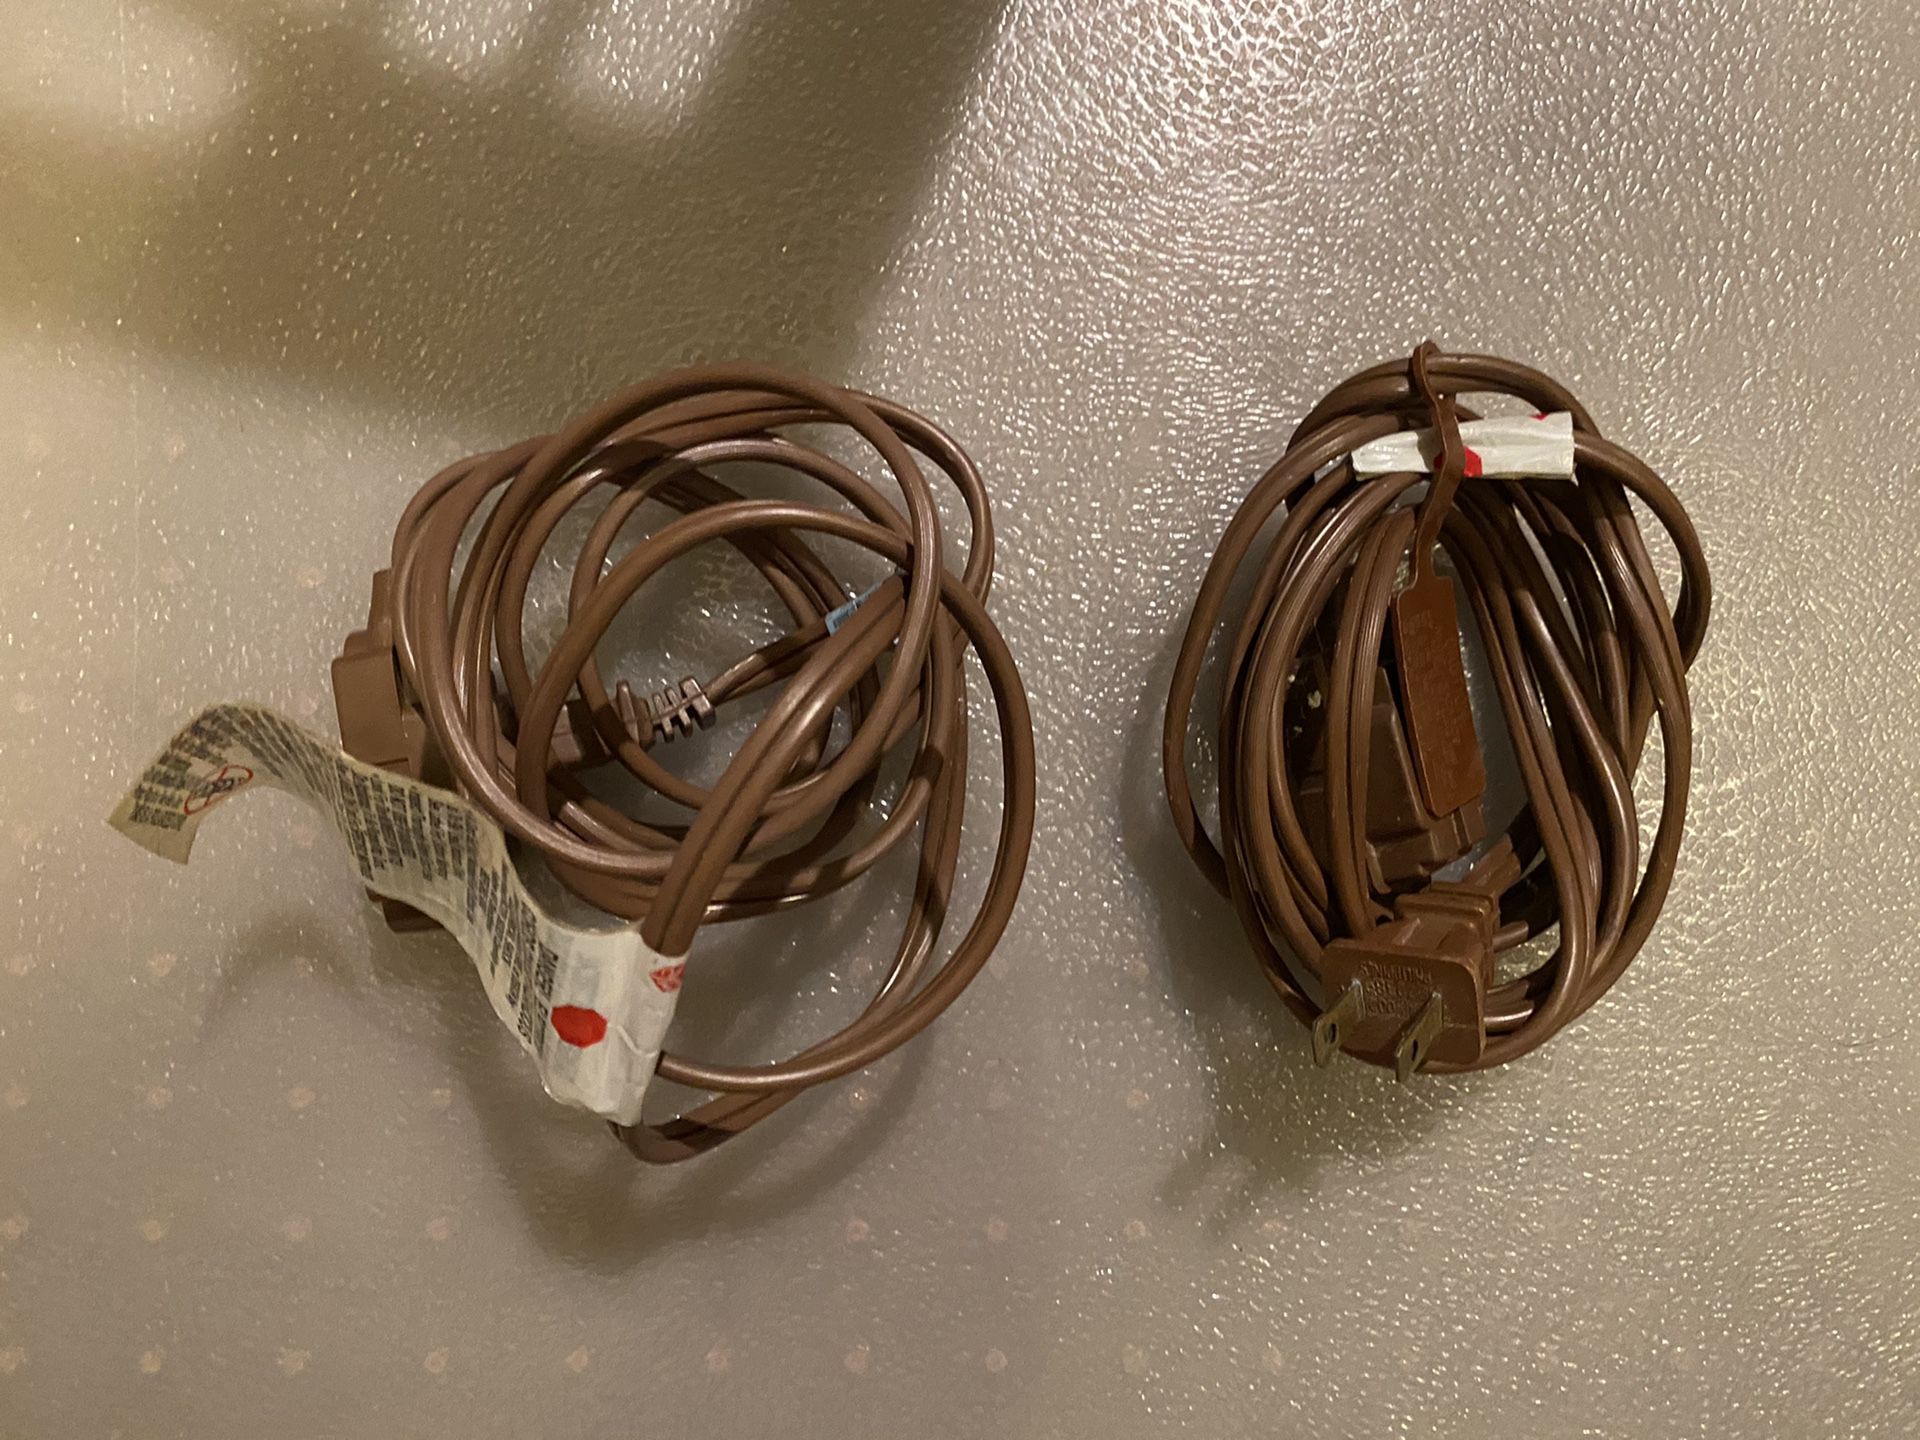 2 Electrical extension cords